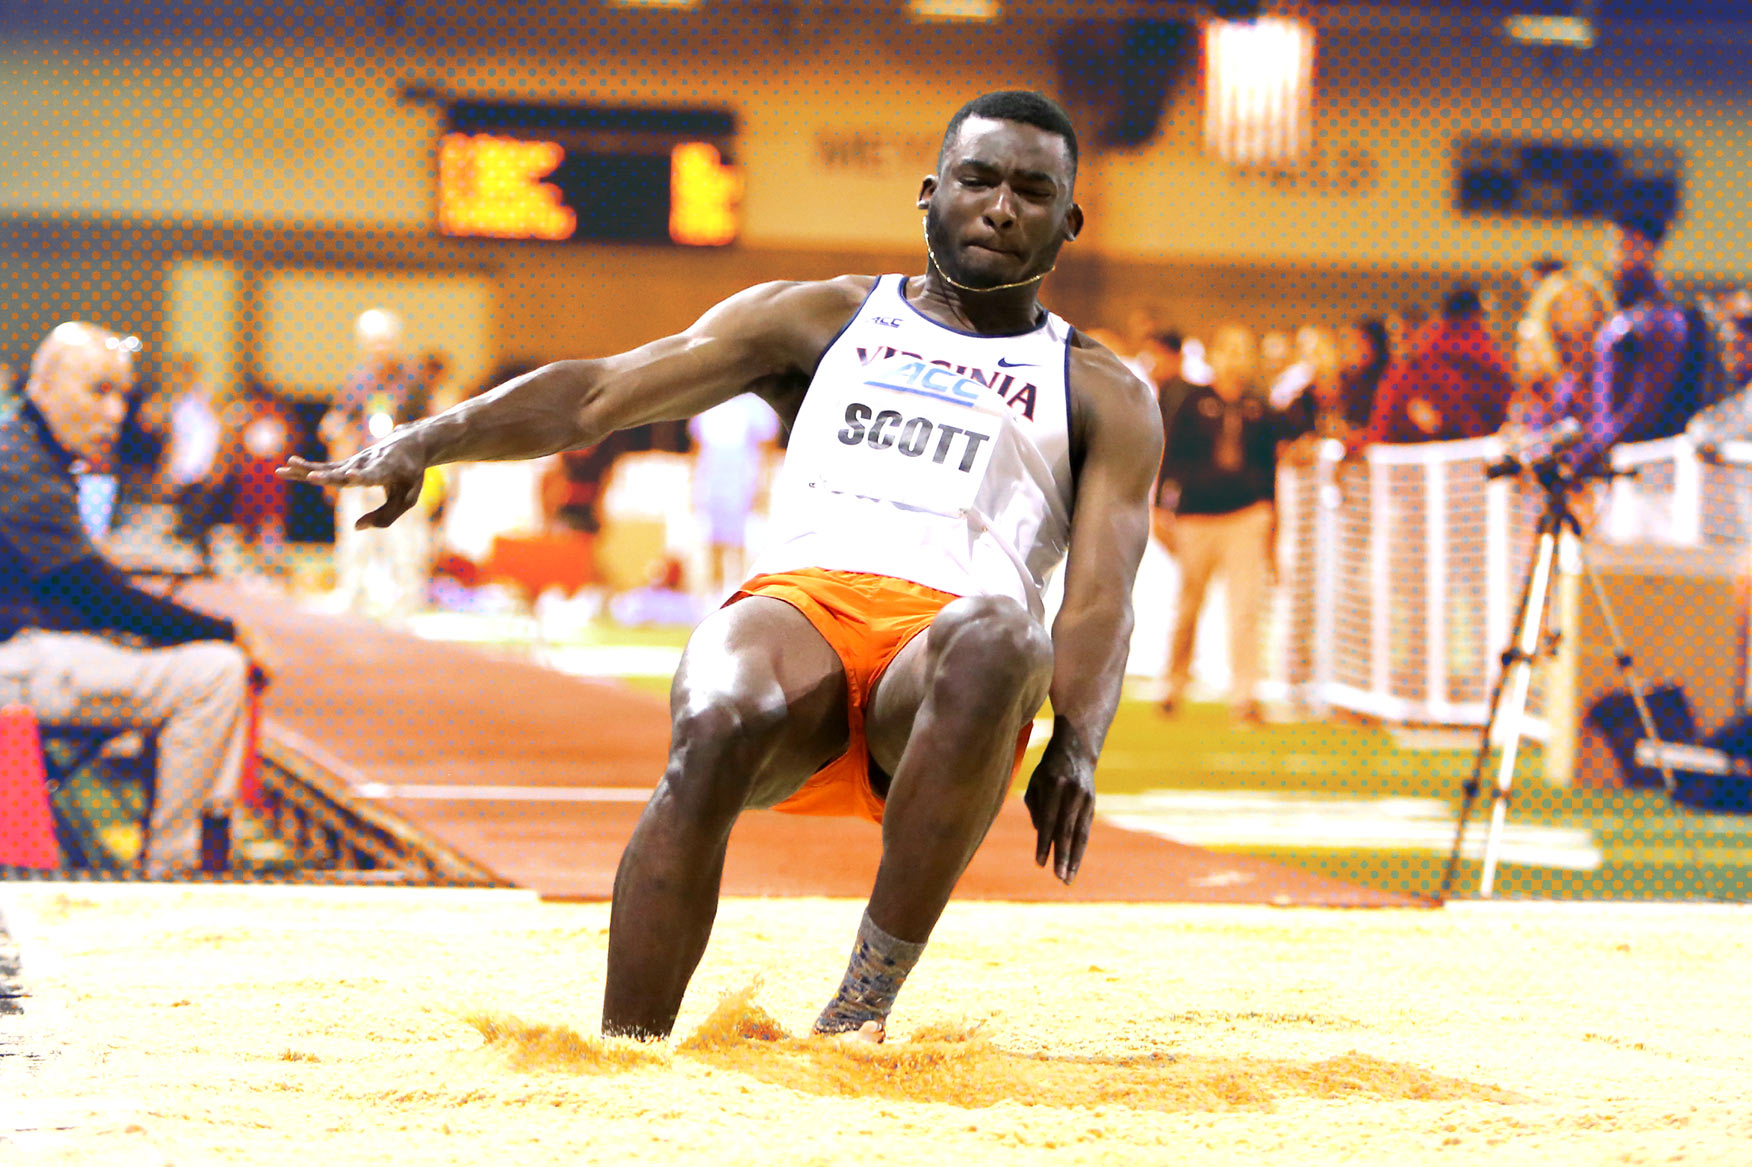 Jordan Scott landing in the sand pit after his long jump during a tack meet